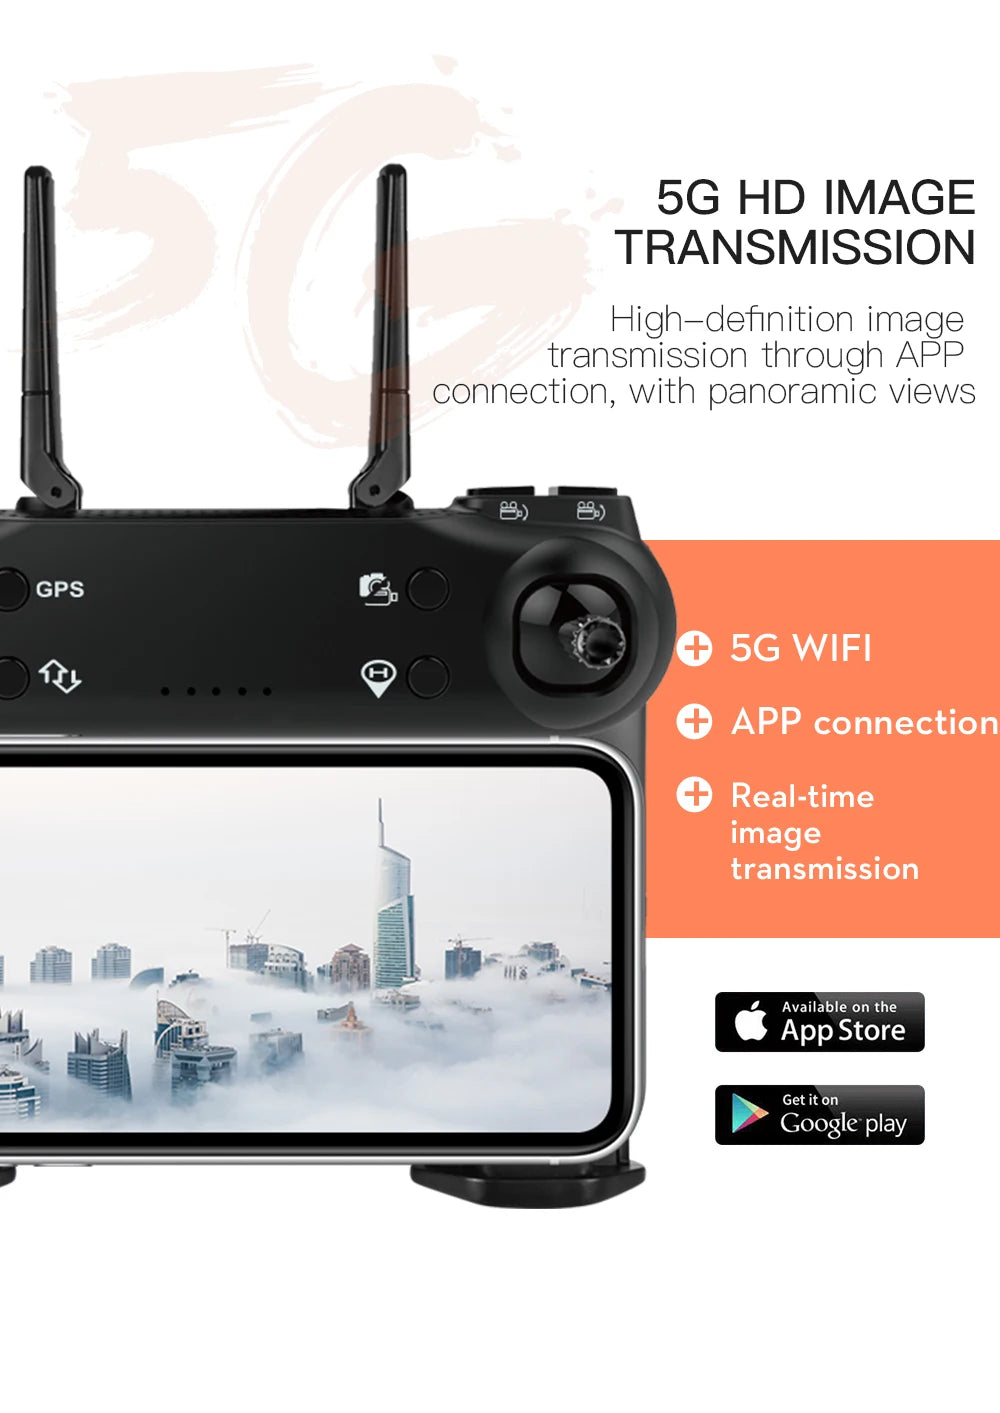 G108 Pro MAx Drone, 5G HD IMAGE TRANSMISSION Available on the Store Get Google play App =